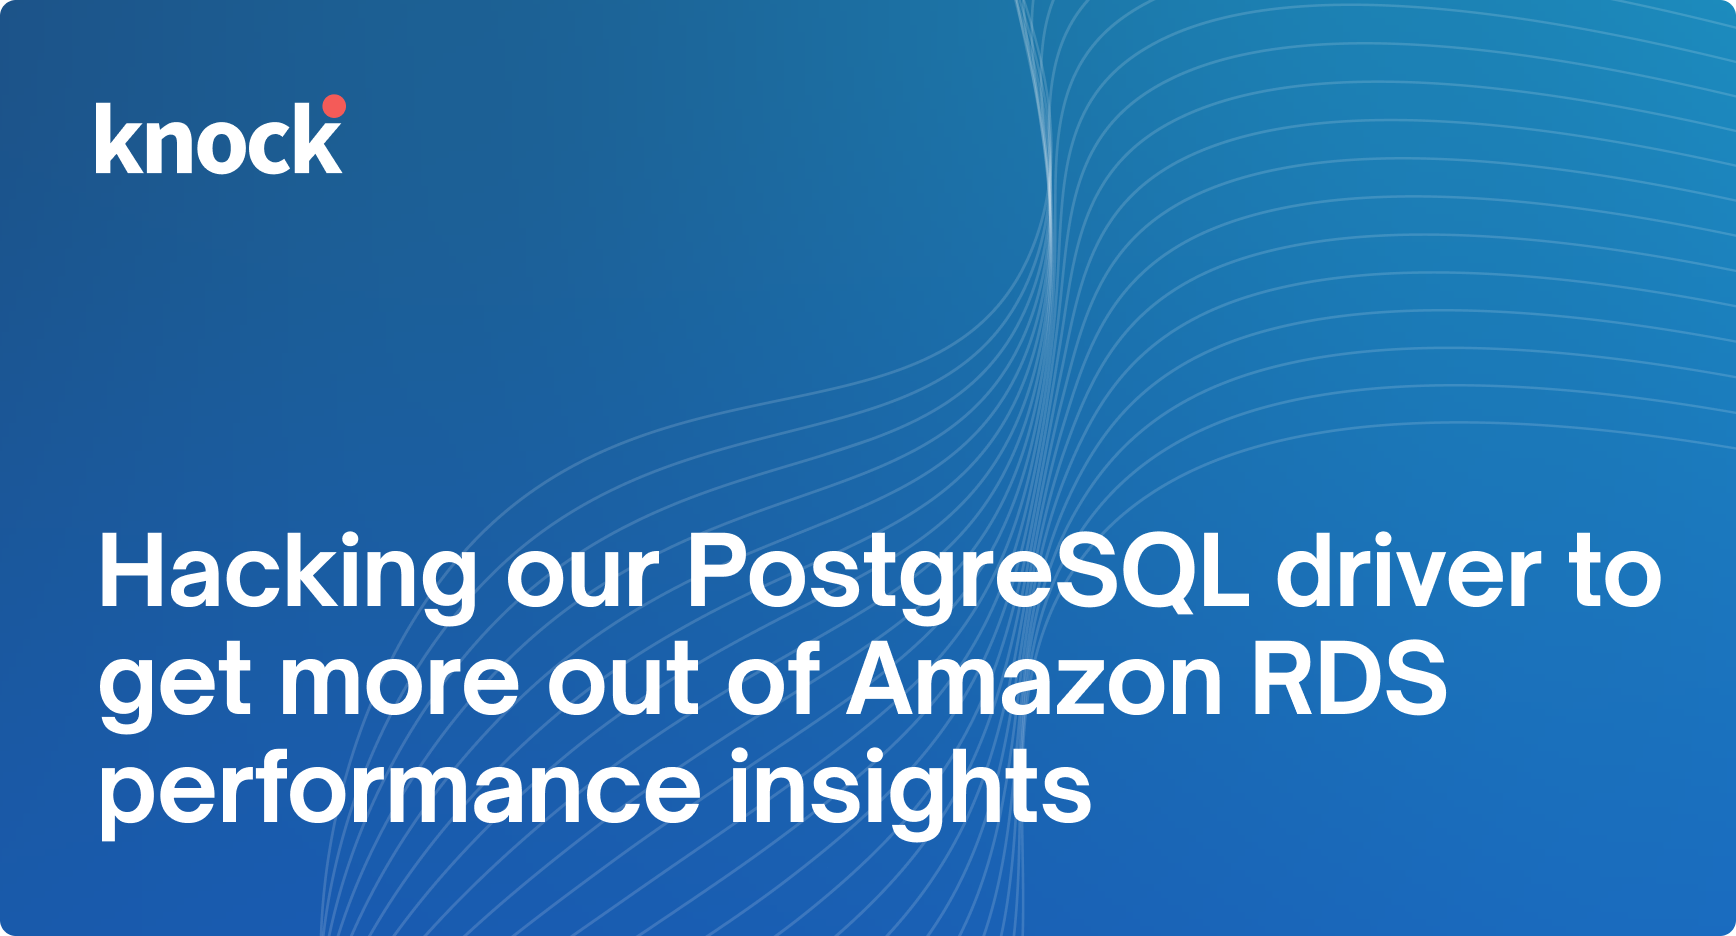 Hacking our PostgreSQL driver to get more out of Amazon RDS performance insights